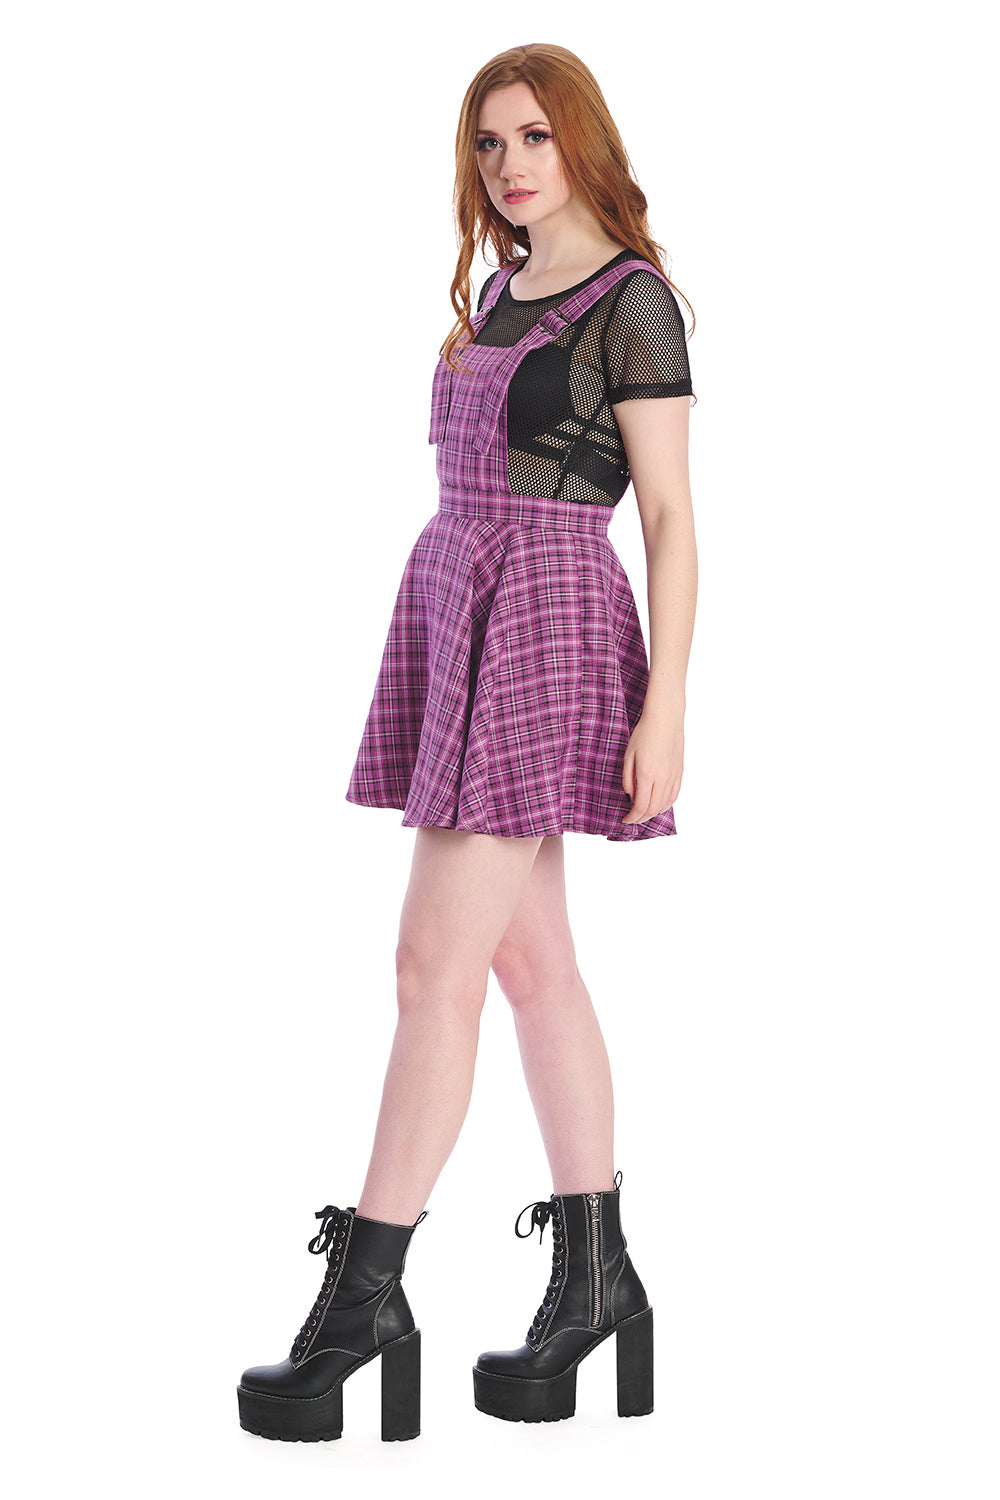 Model in a purple pinafore dress with black mesh crop top and black boots 